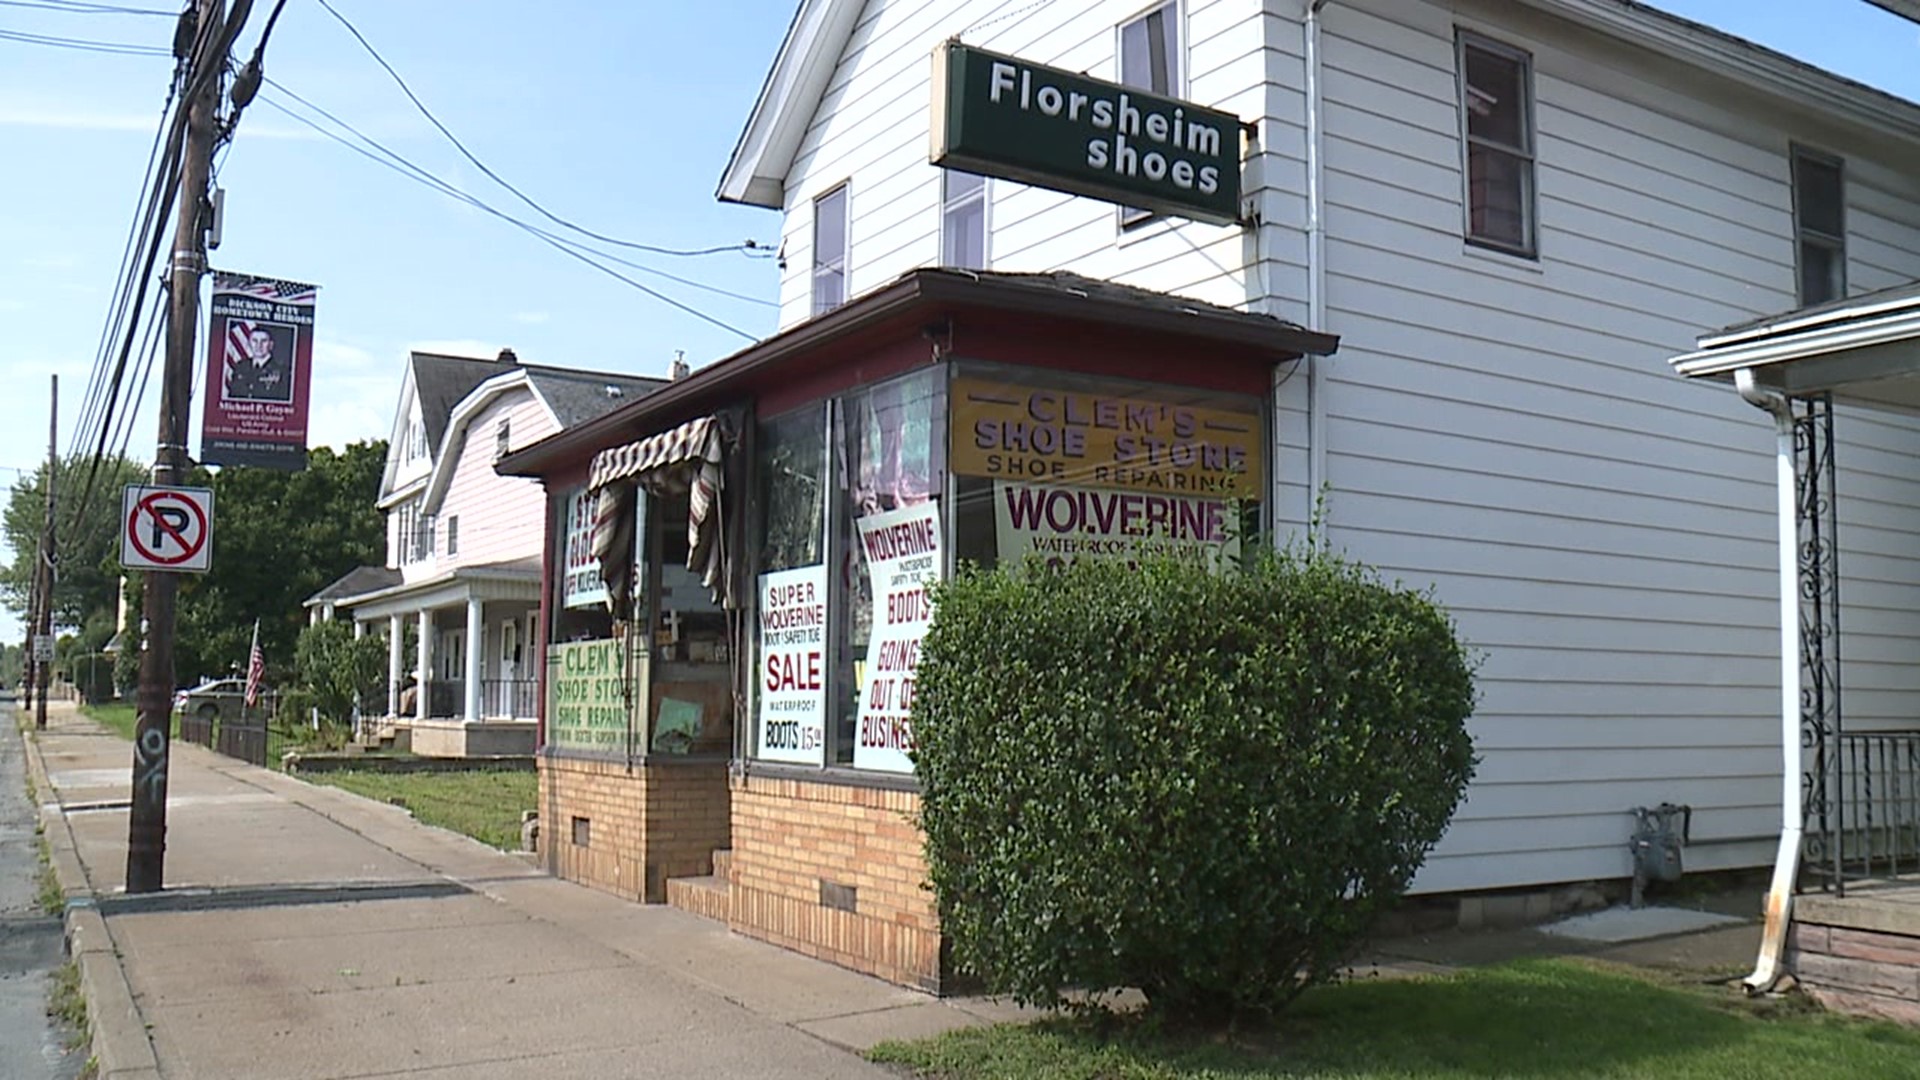 After 90 years, the retail and repair business in Dickson City is preparing to close.